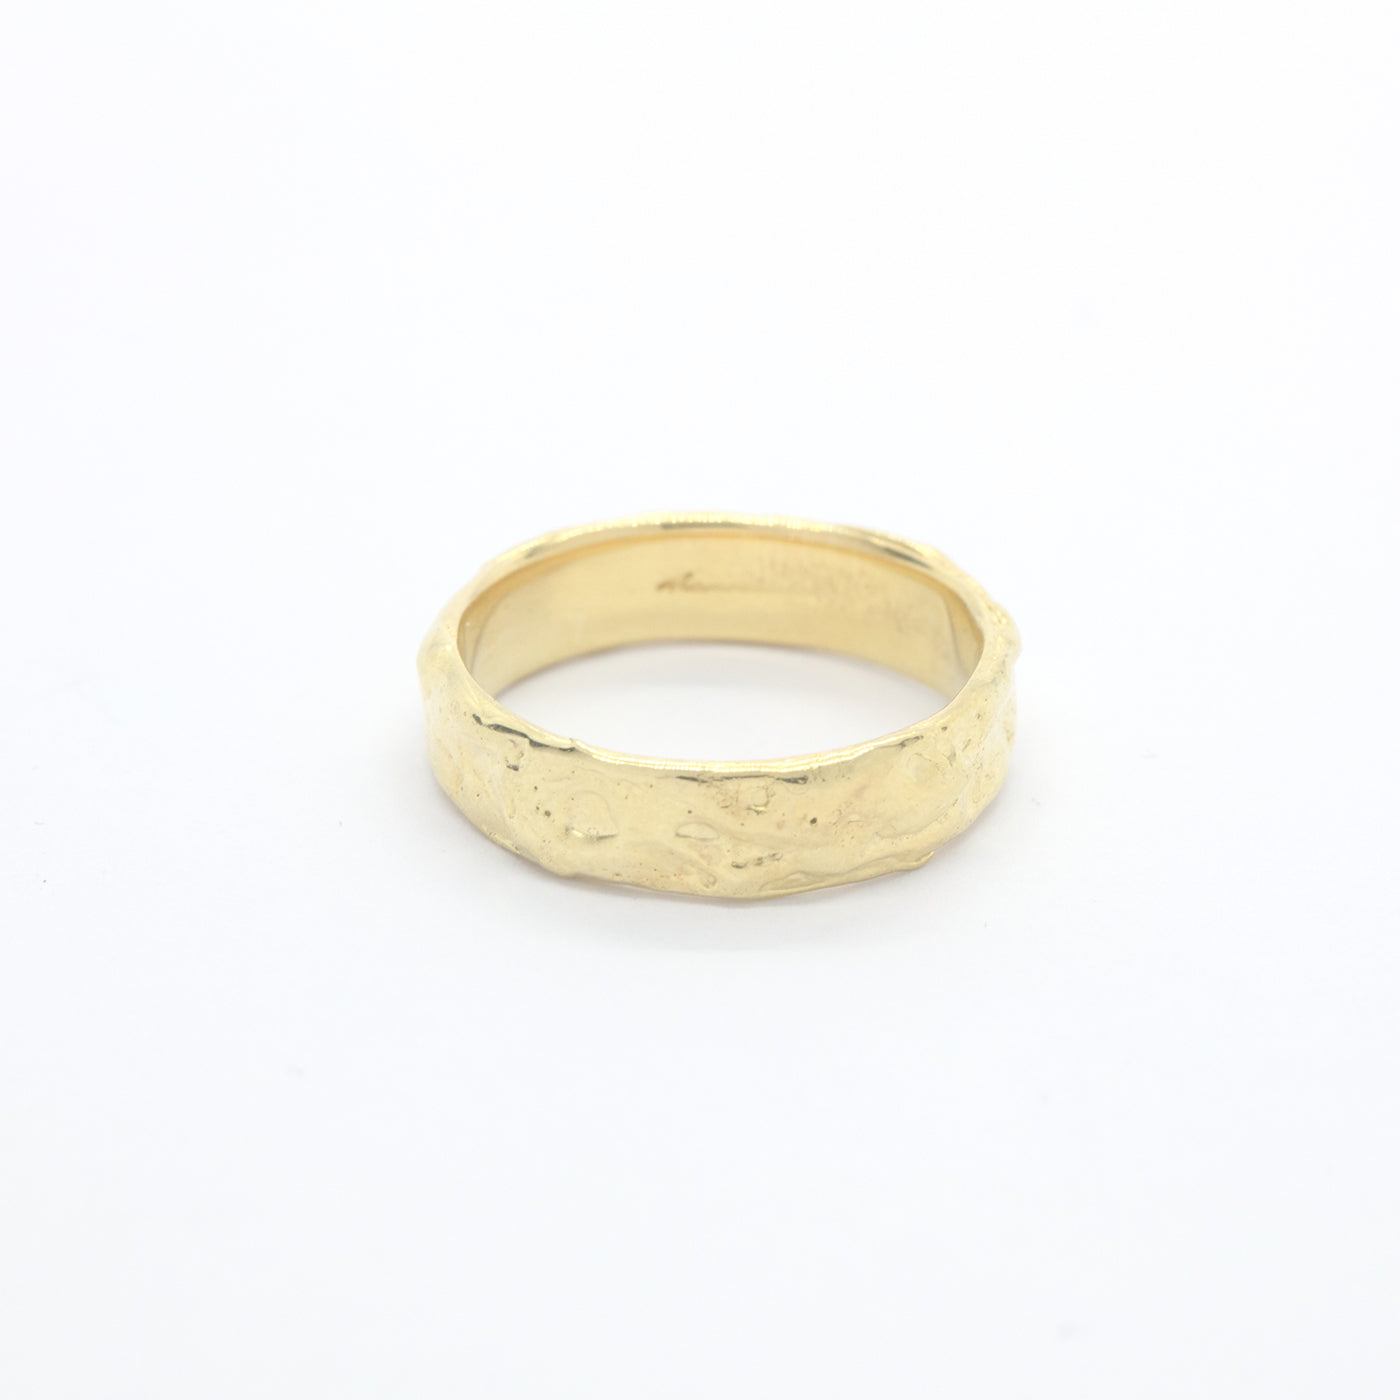 Ring Aine Wedding Band for Him 14ct or 18ct yellow gold product view innan jewellery independent atelier berlin